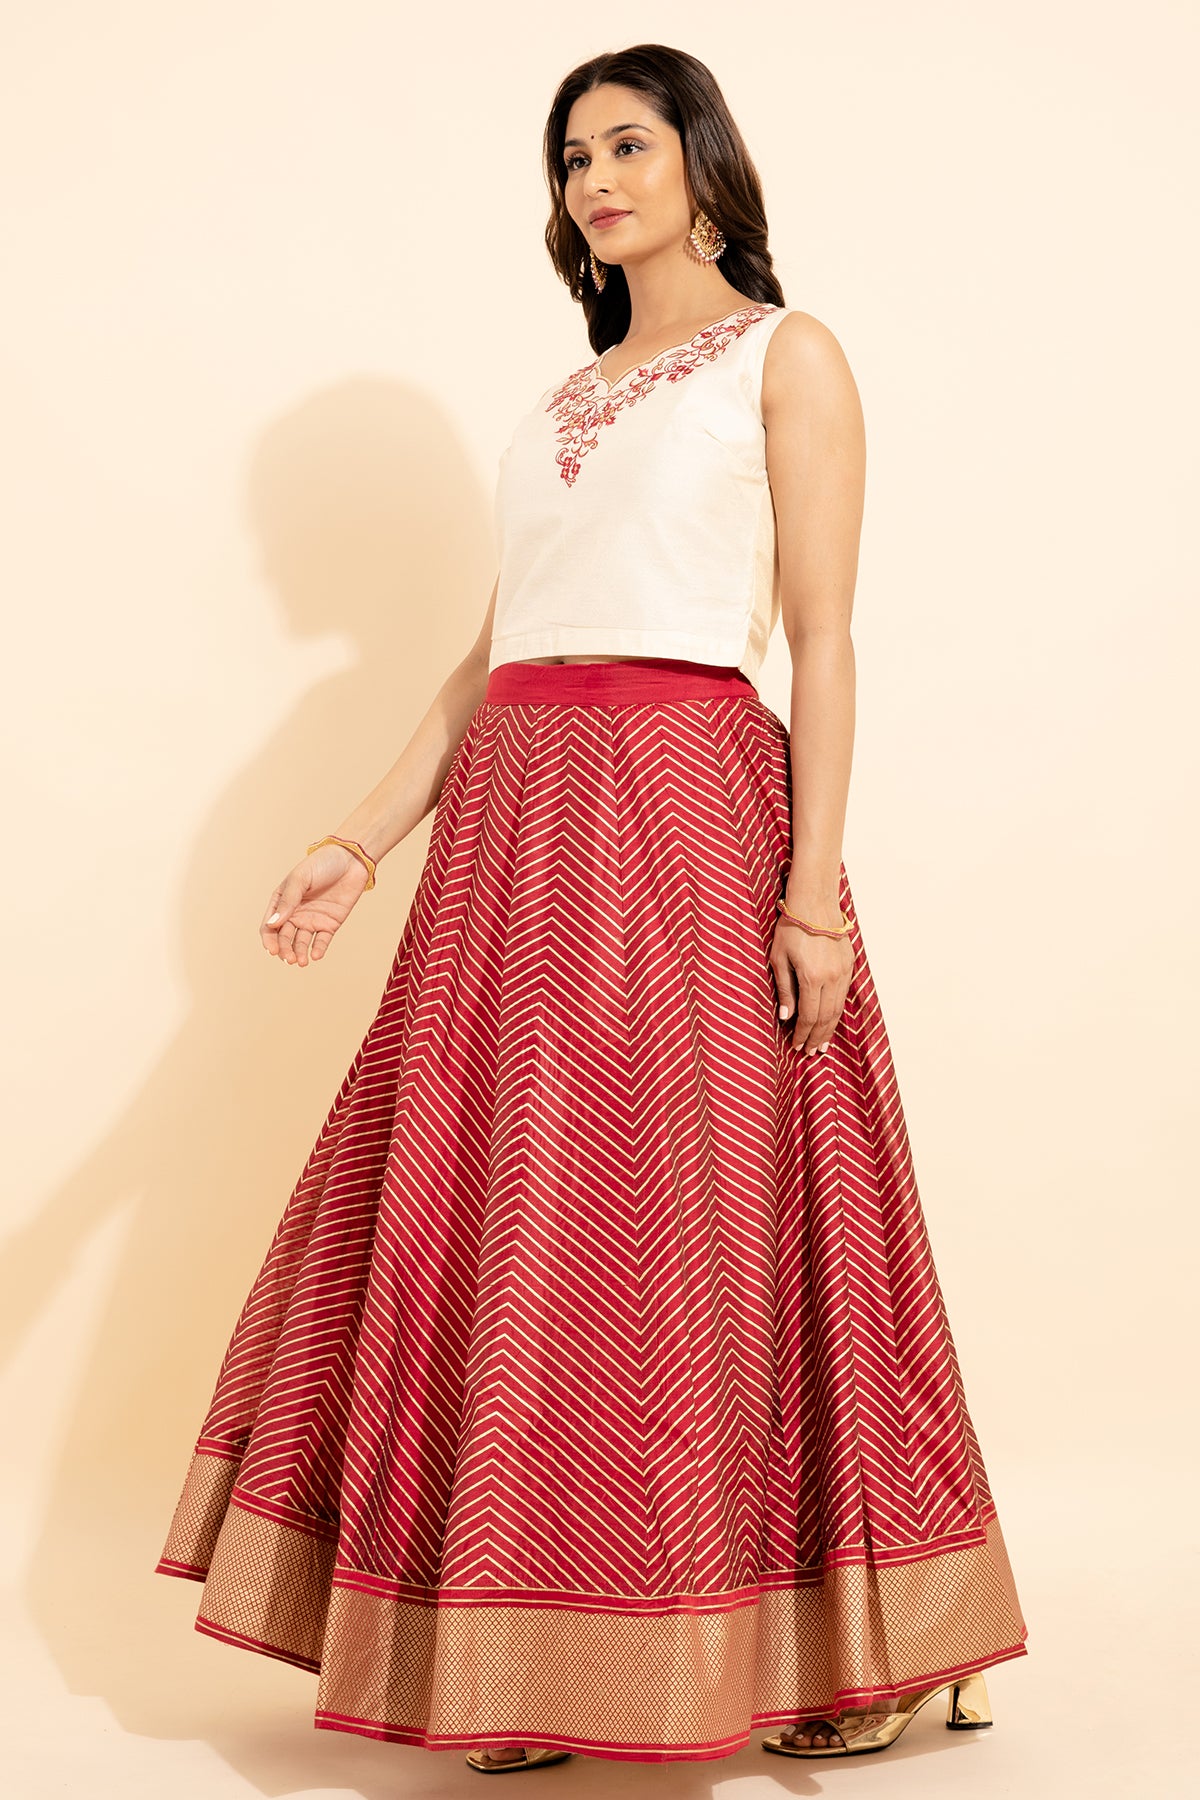 Floral Embroidered Neckline Top & Stripe Printed Skirt Set - Off White & Red